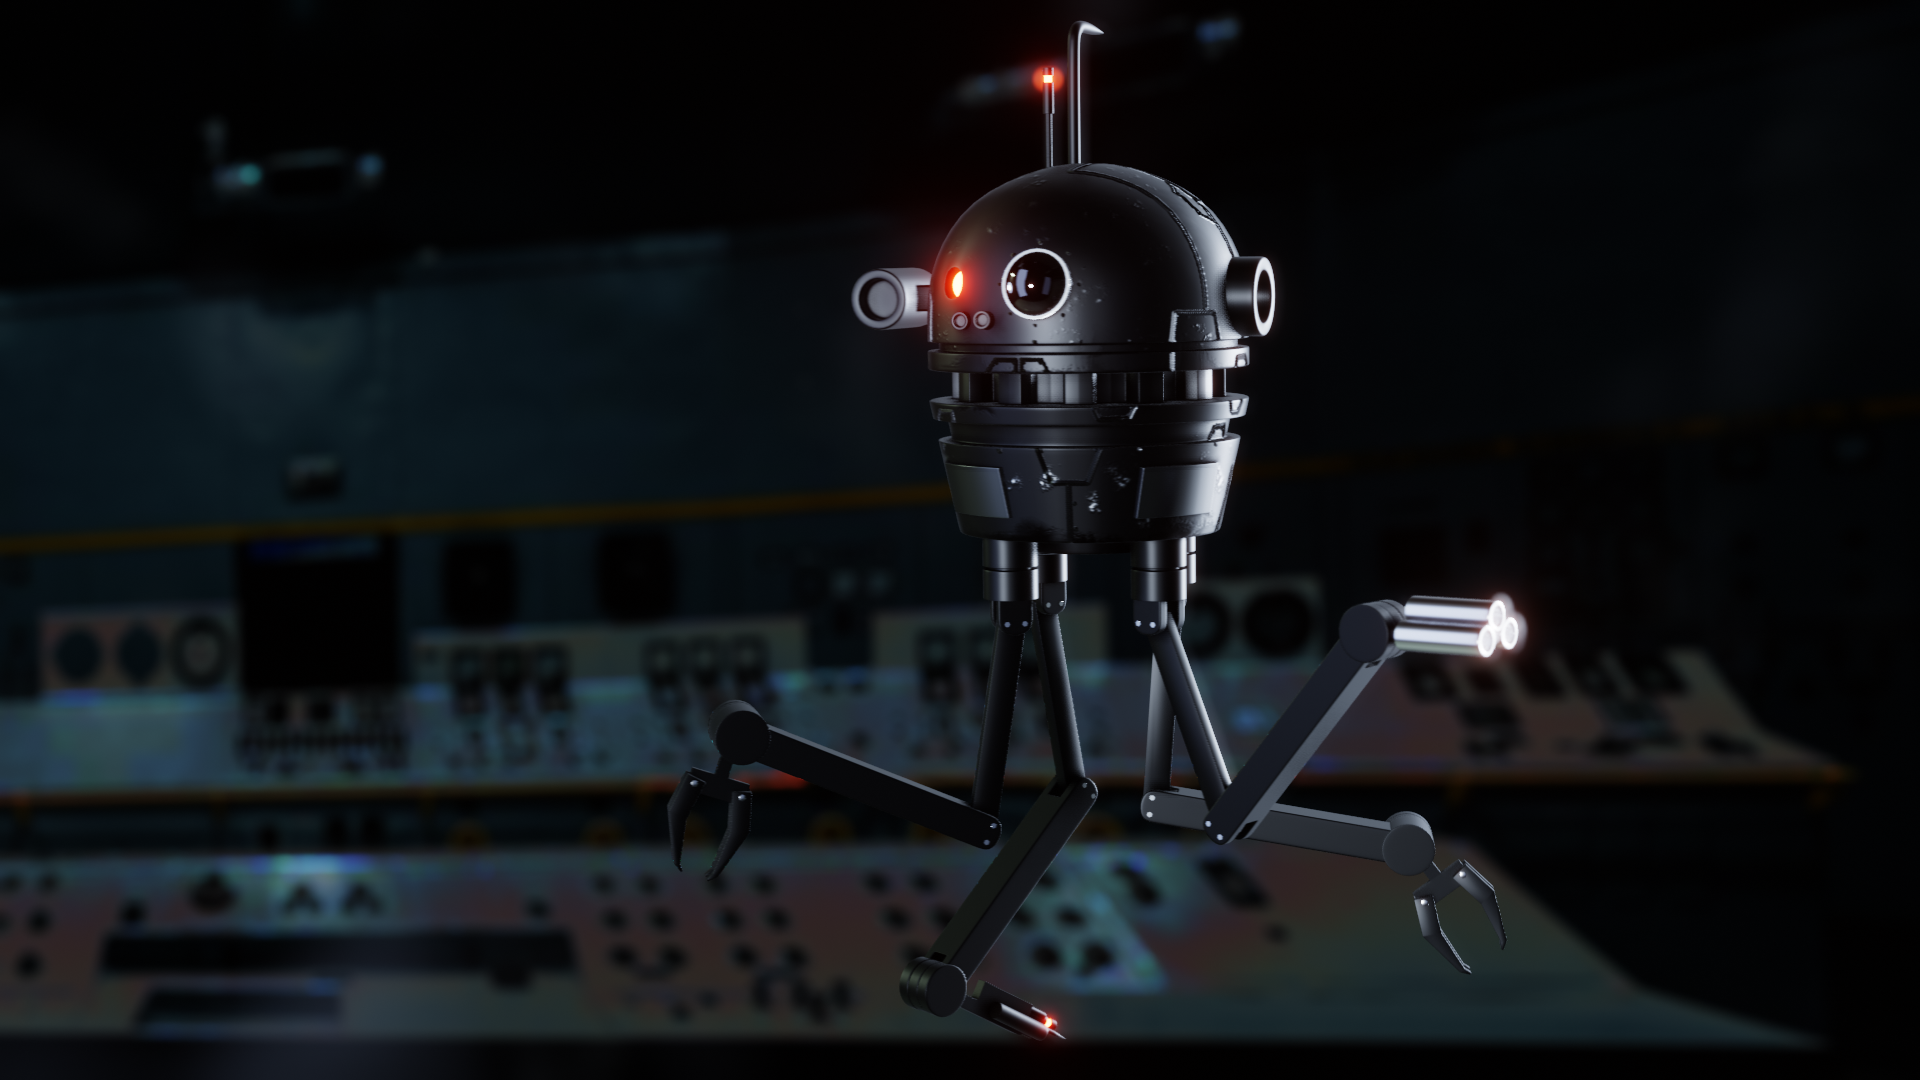 Sci-Fi Robot Drone preview image 1